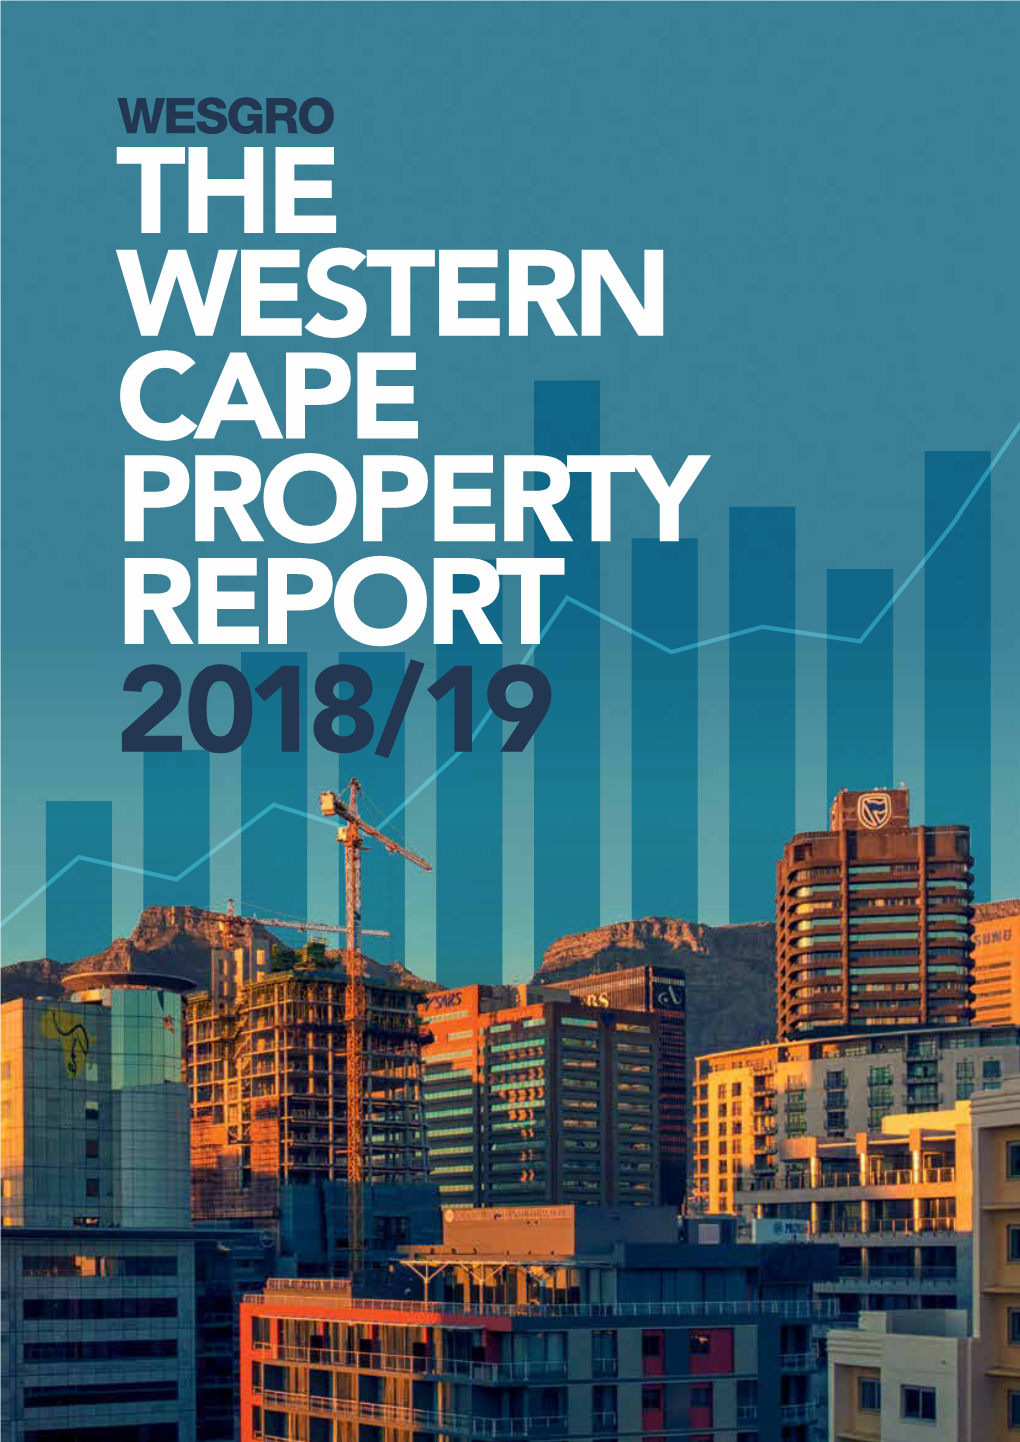 The Western Cape Property Report